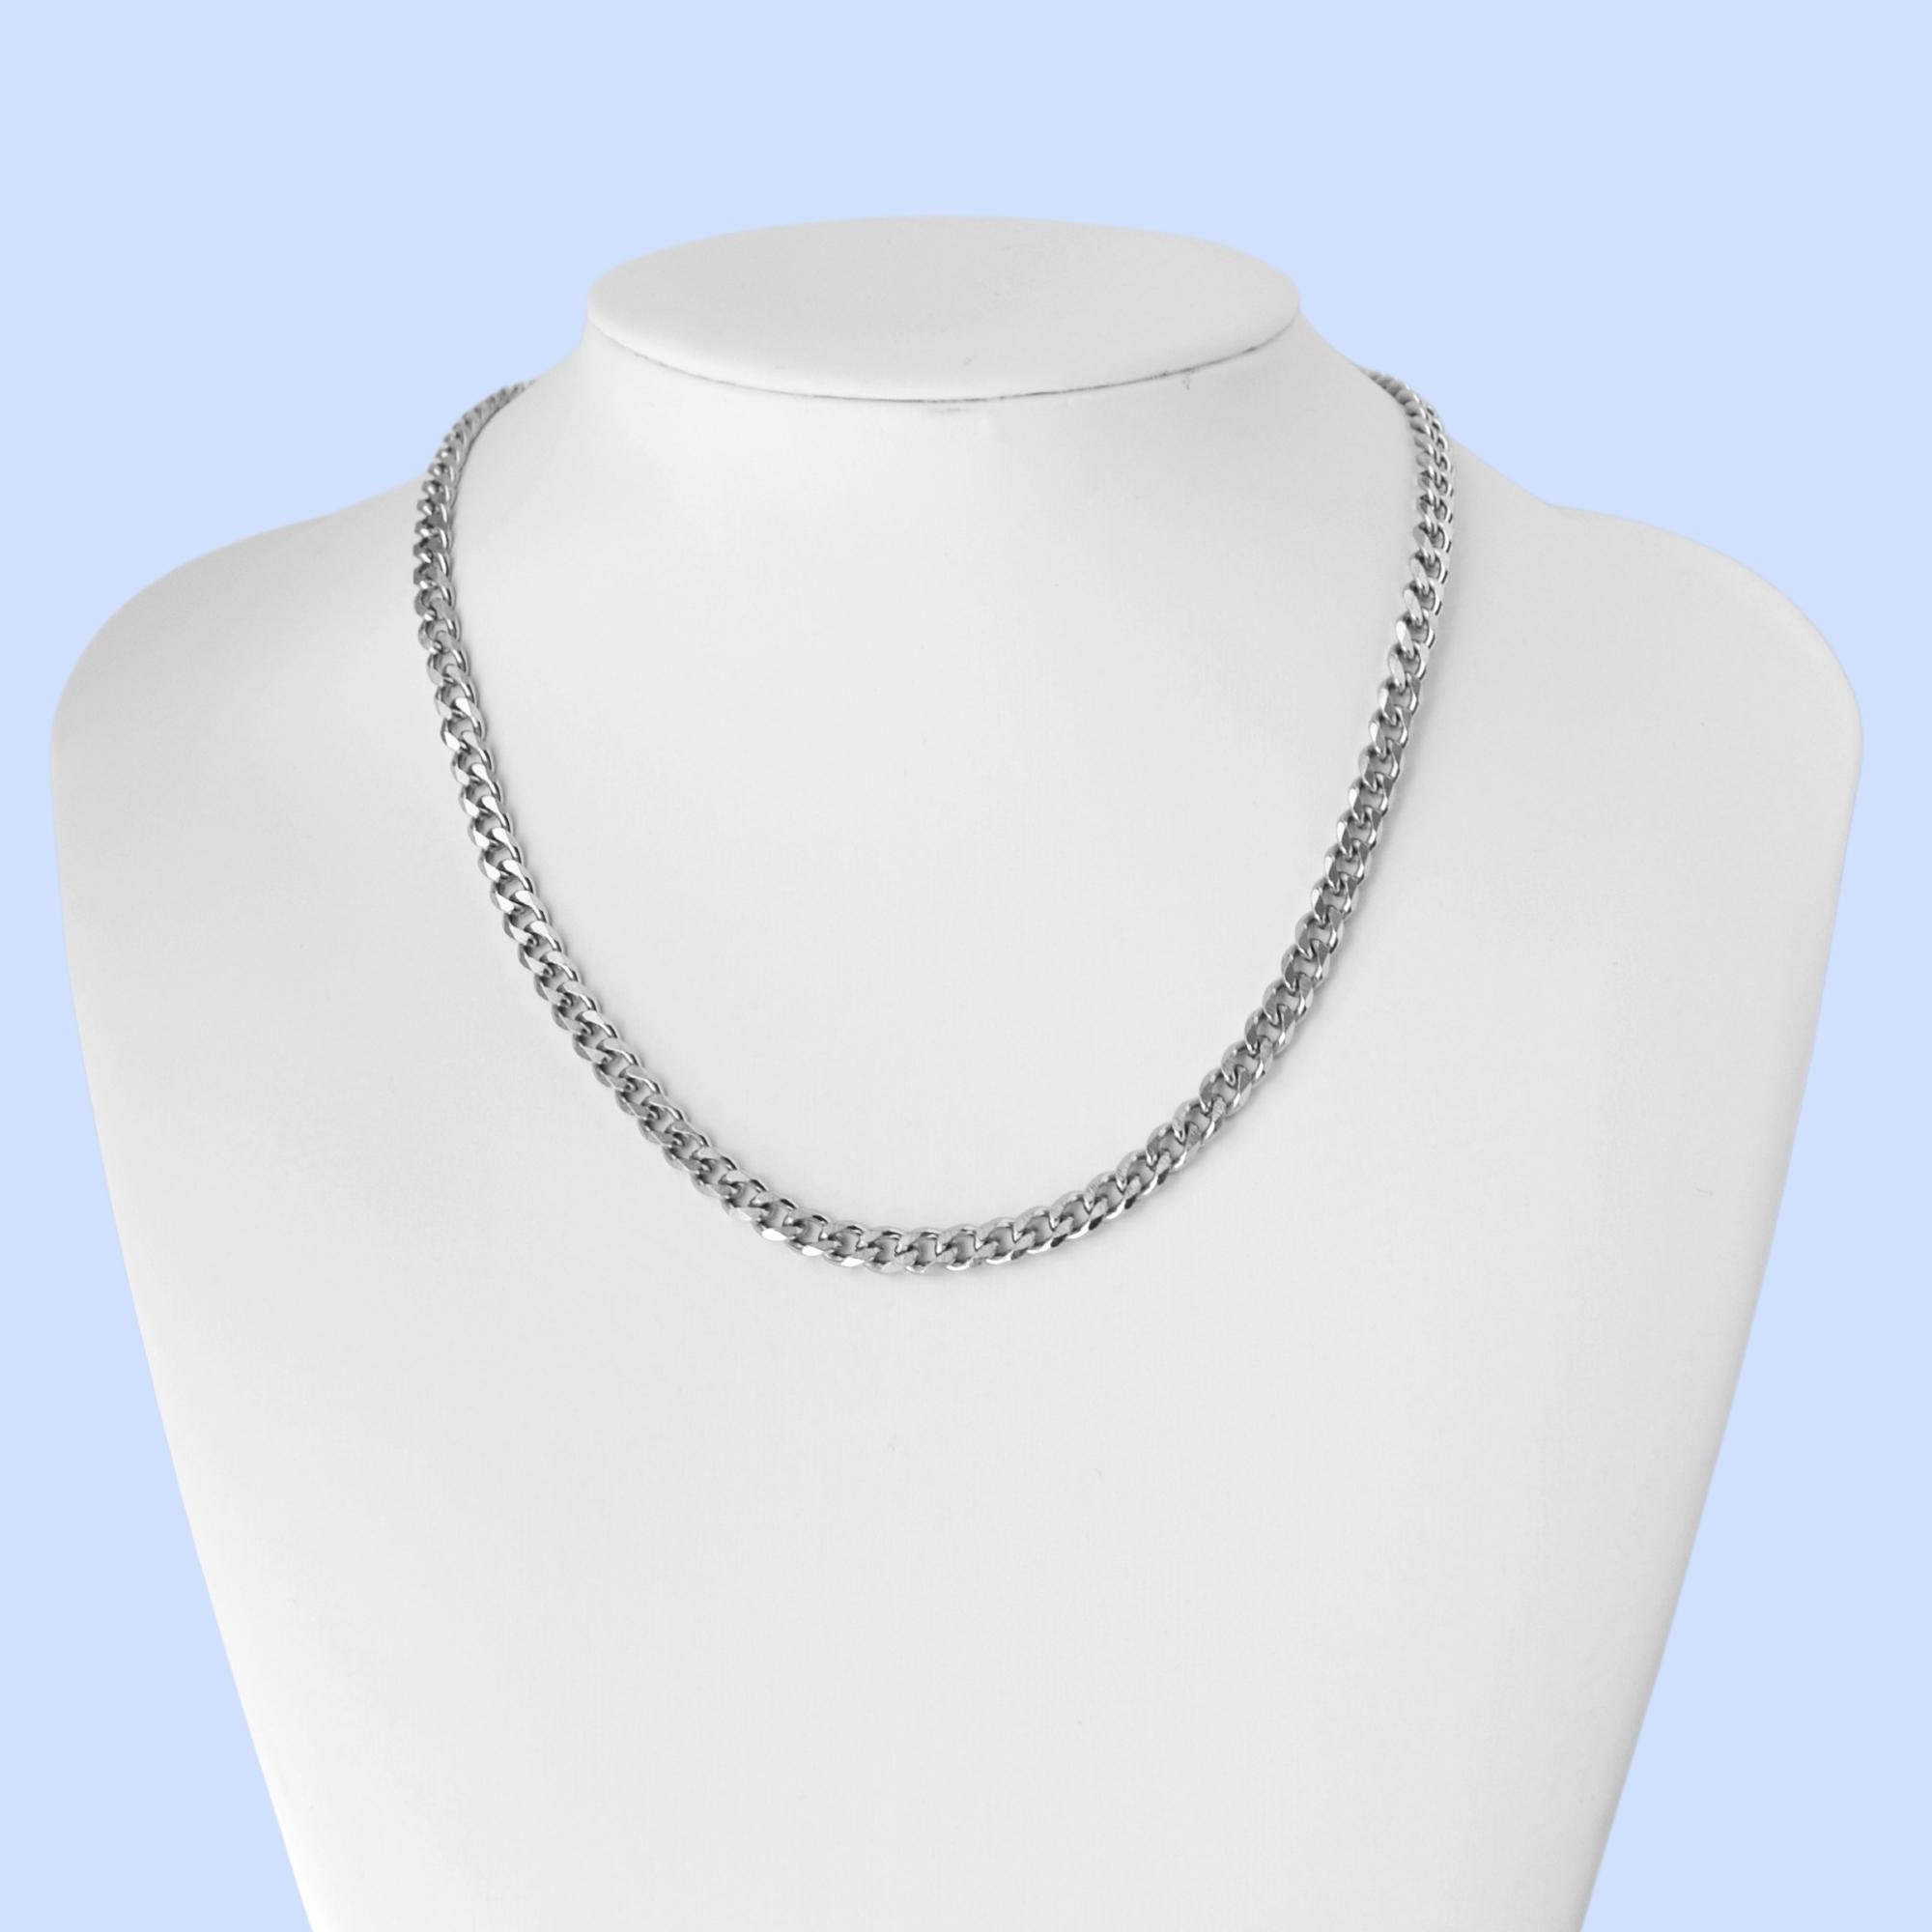 Men's Silver Chain / Silver 5mm Curb Chain Necklace for Men or